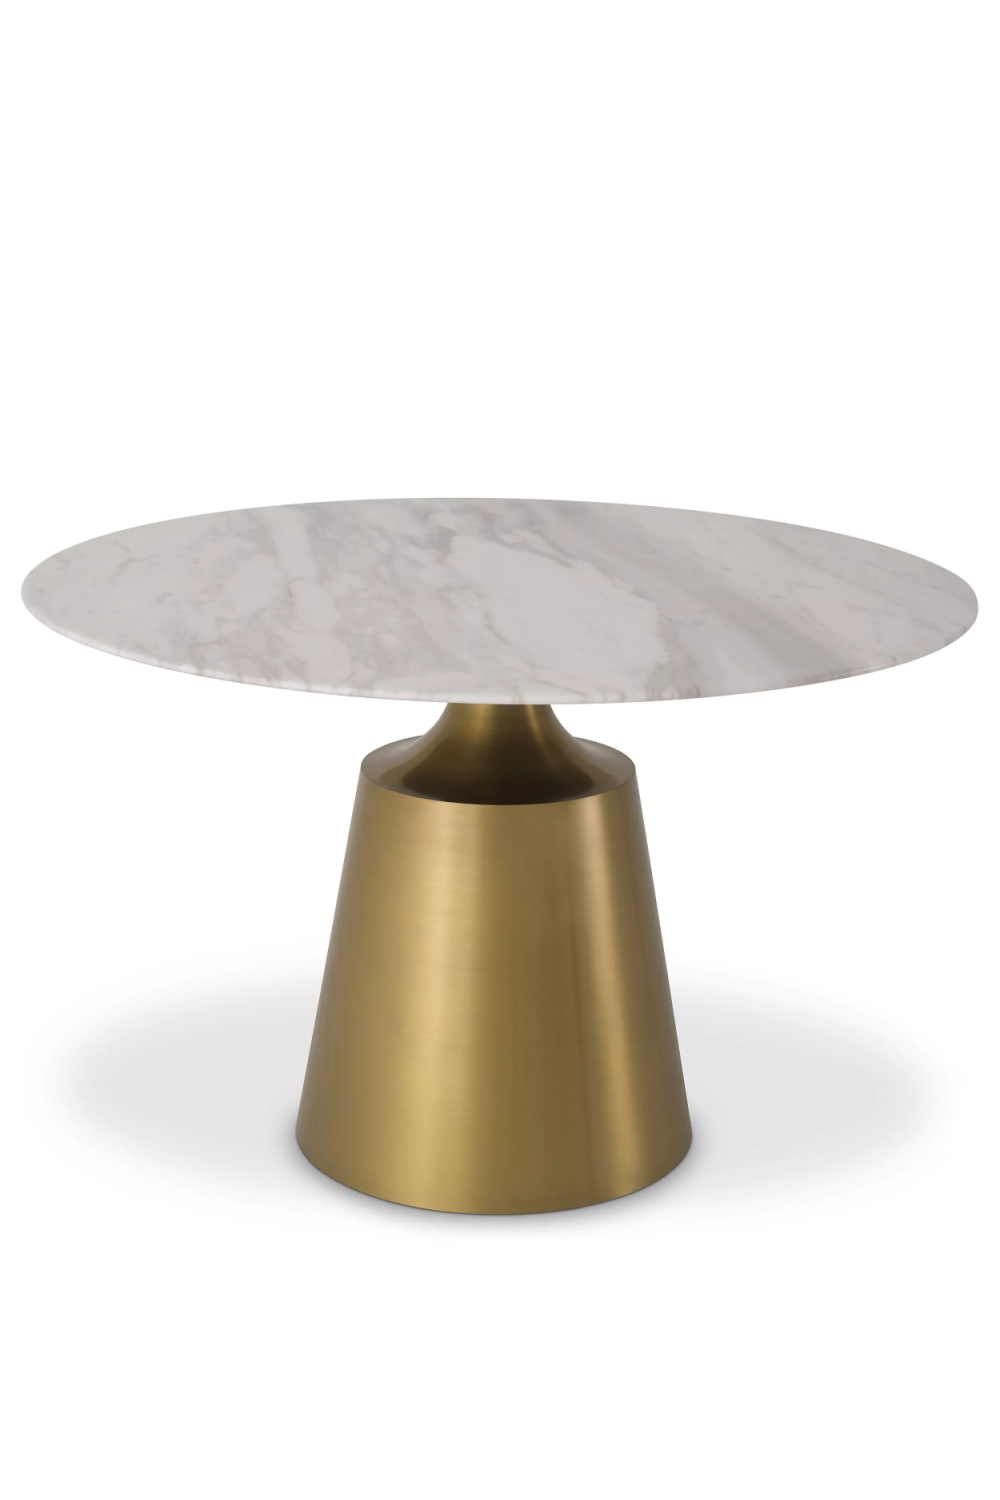 Round Marble Dining Table | Eichholtz Nathan | Oroa.com